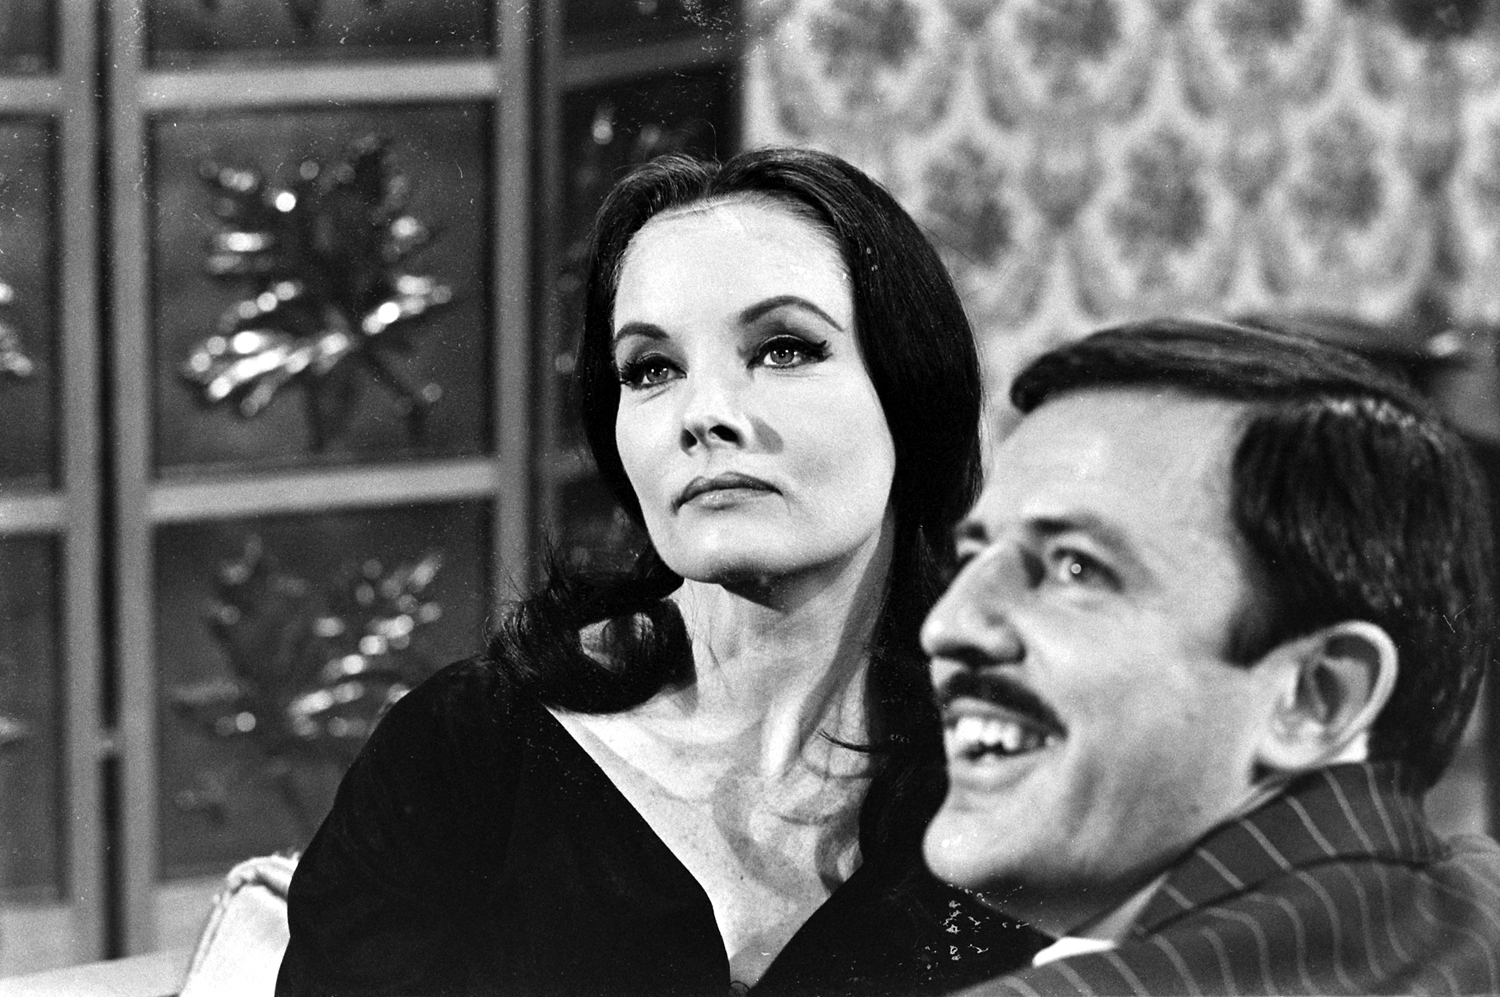 John Astin with an actress auditioning for the role of Morticia Addams, 1964.